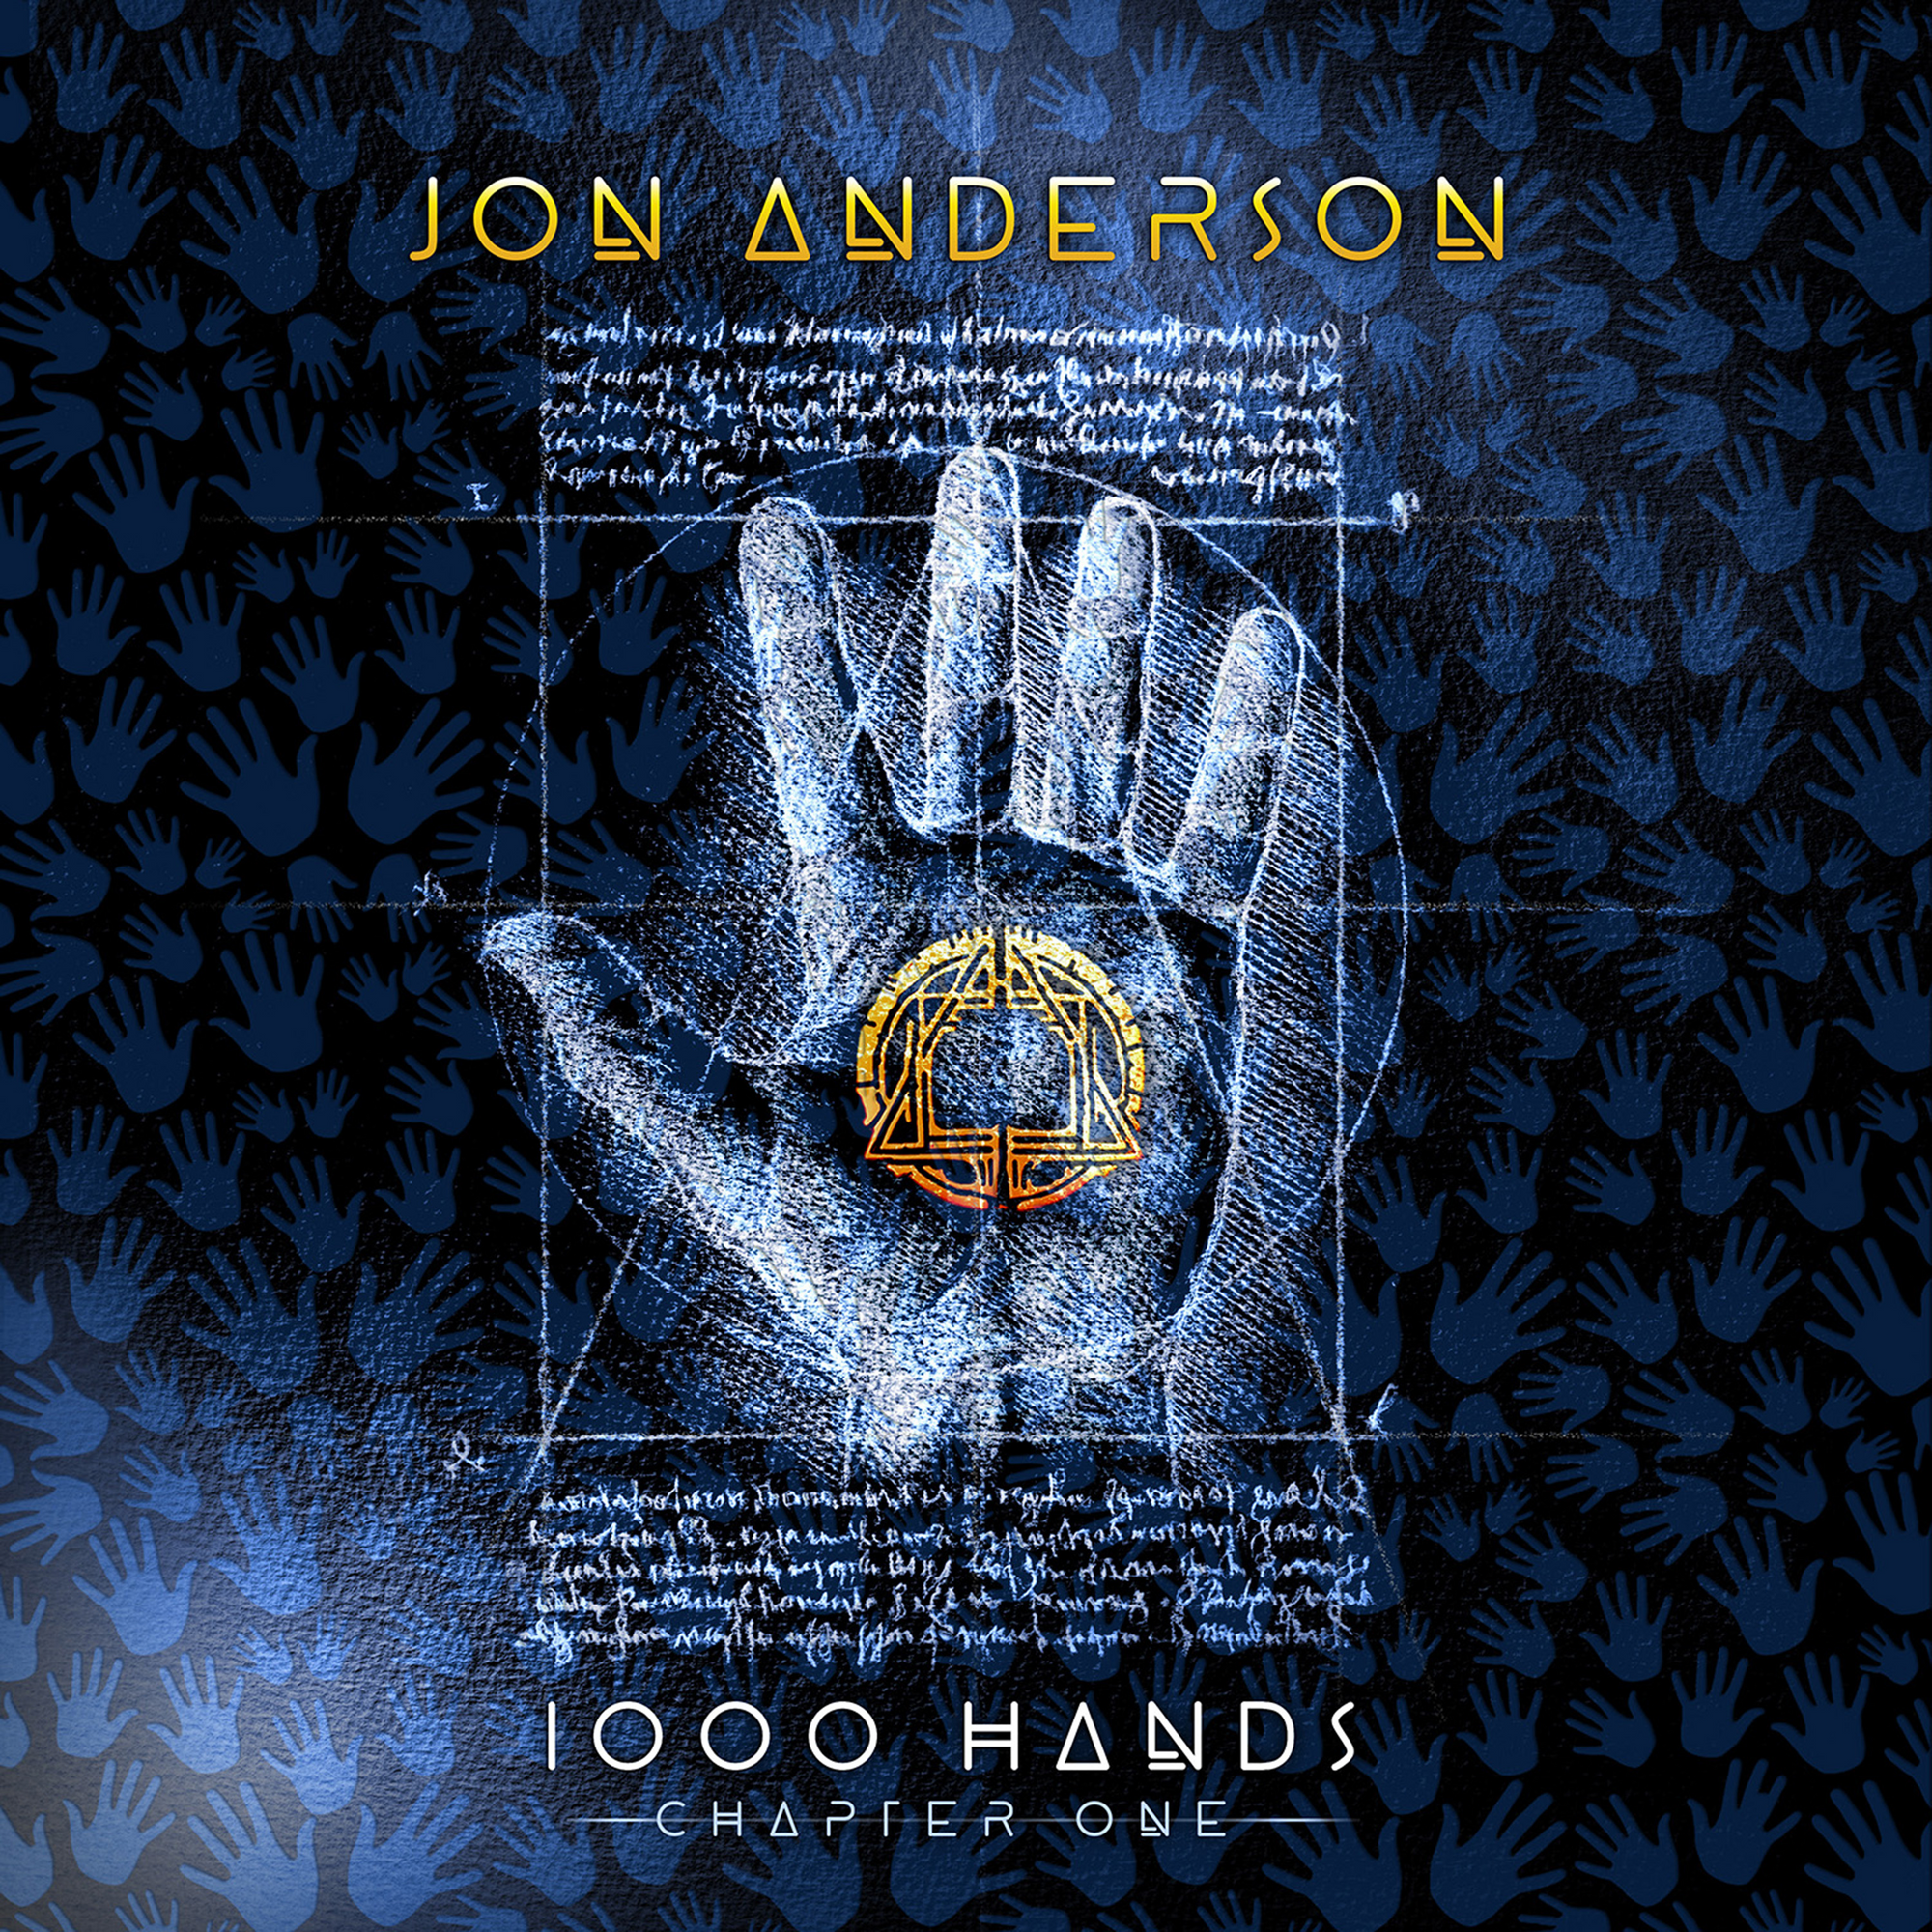 Jon Anderson, Yes Founding Member, Launches Single and Pre-Order For New Album, 1000 Hands